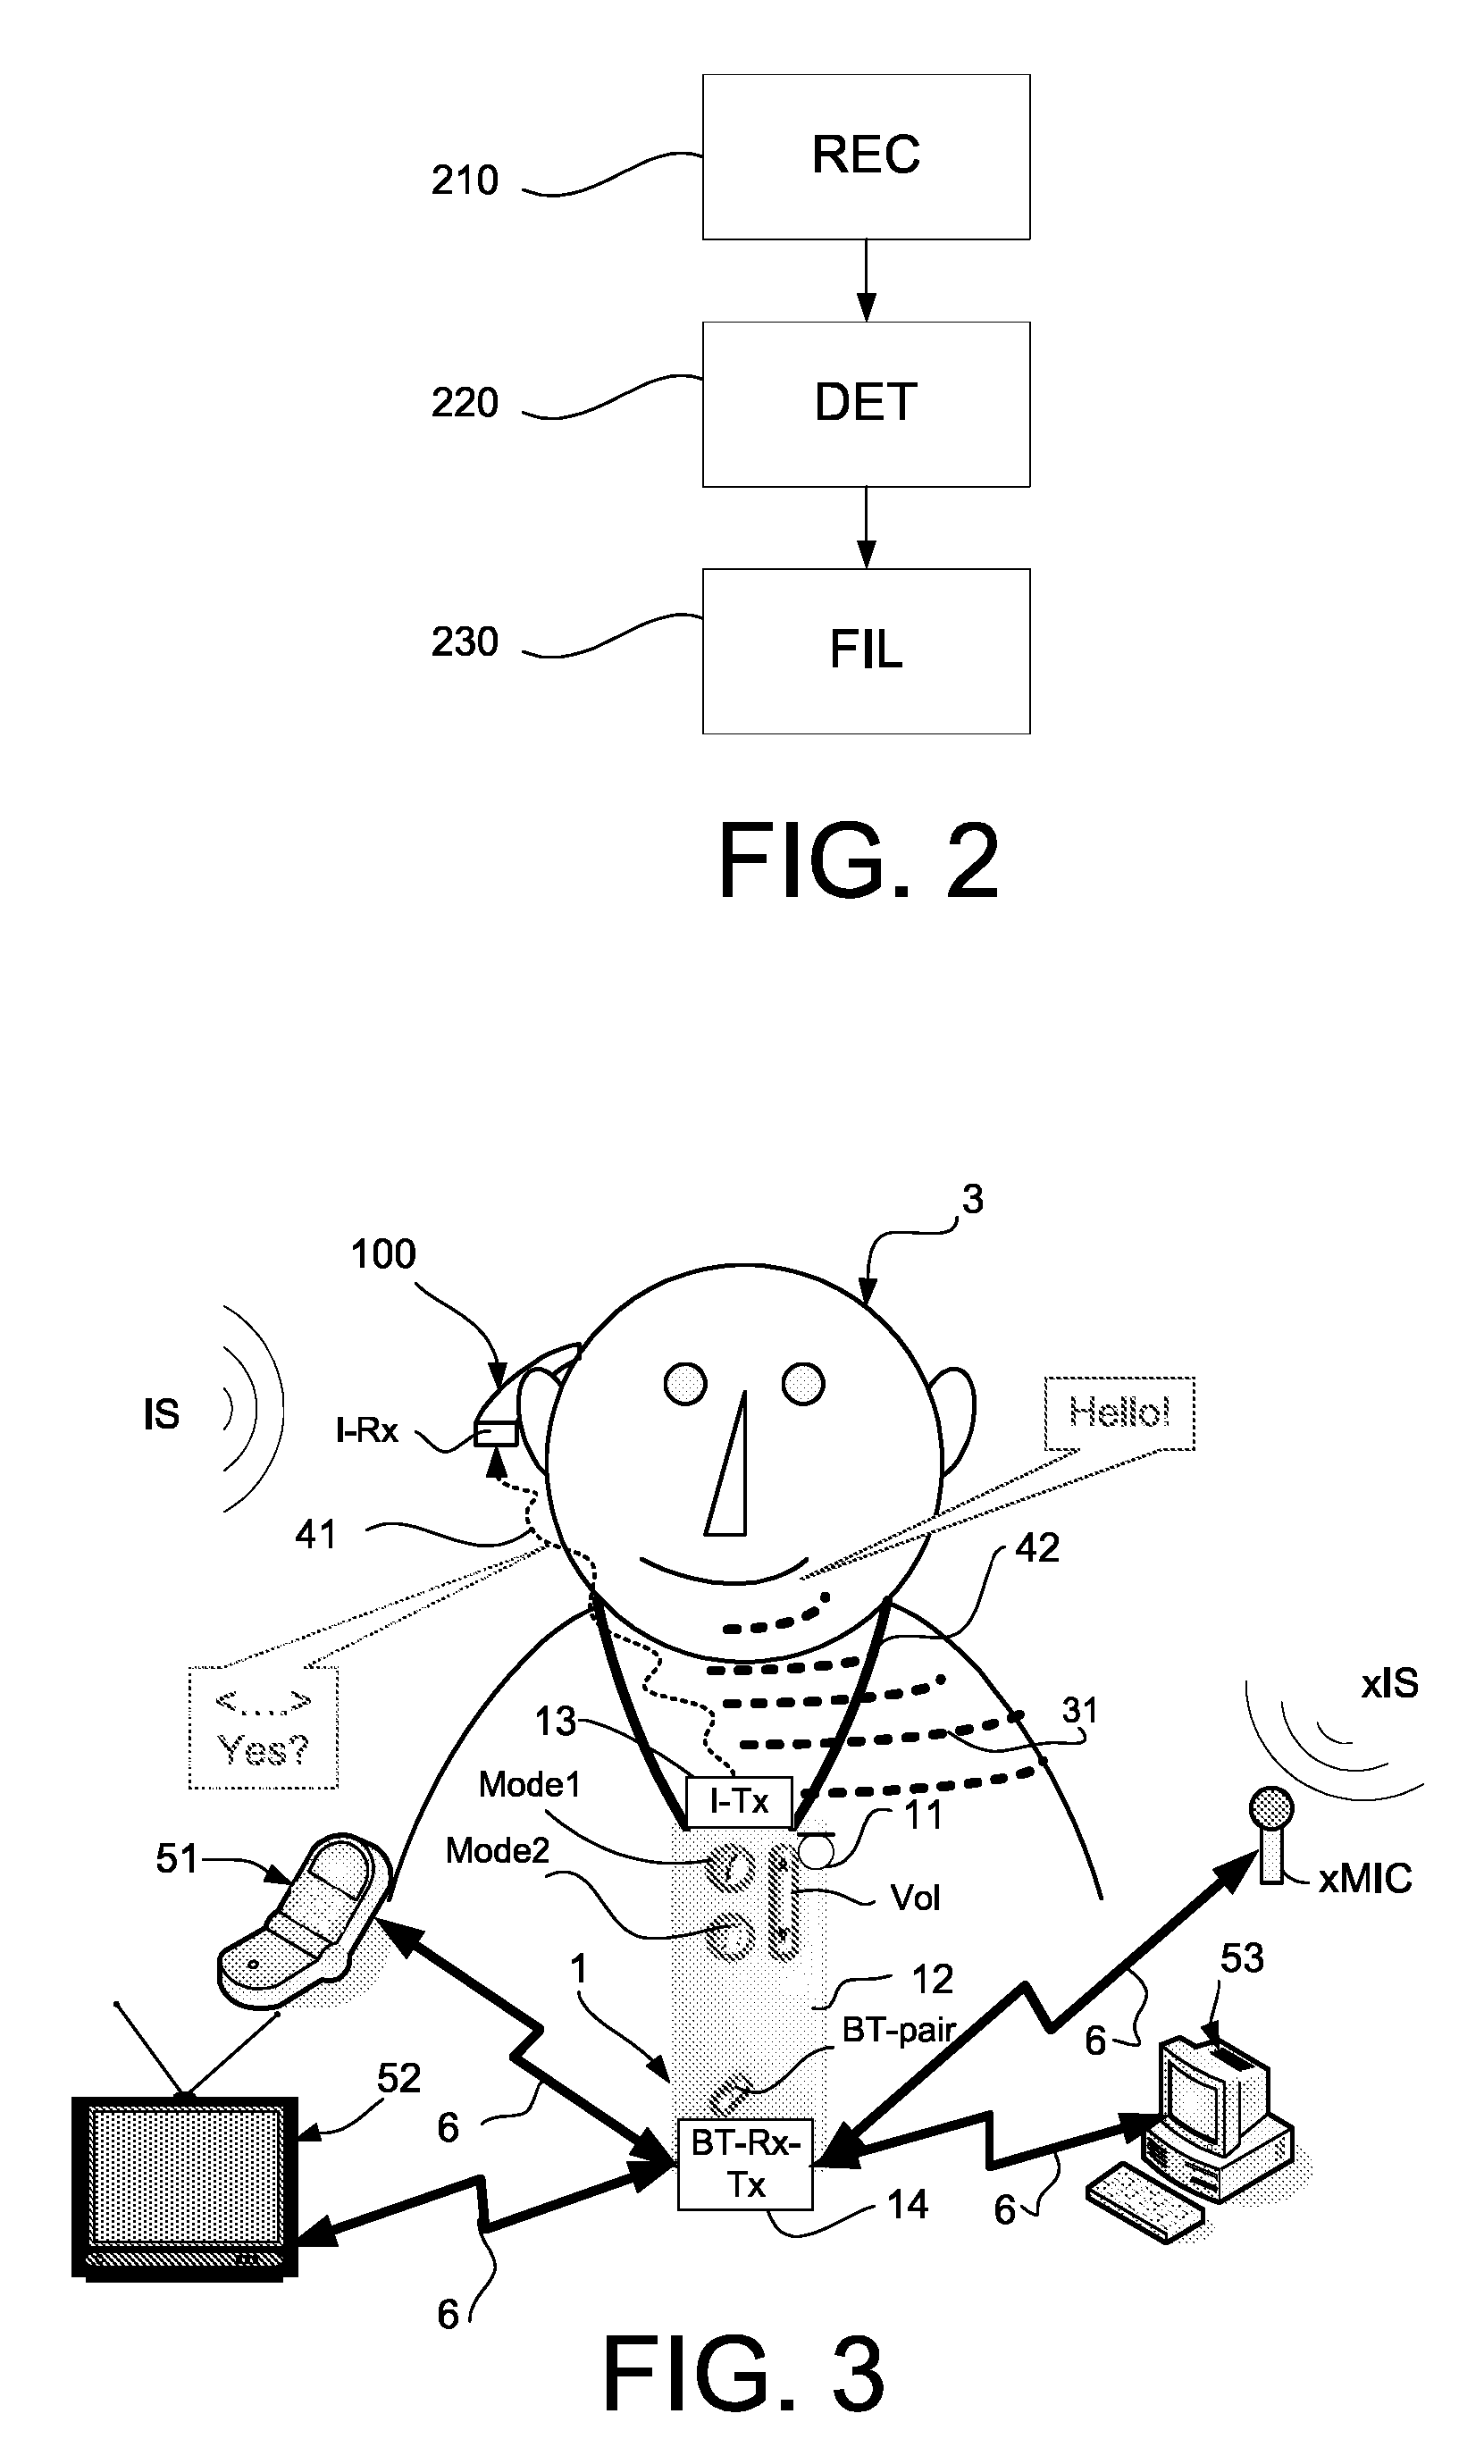 Diminishing tinnitus loudness by hearing instrument treatment